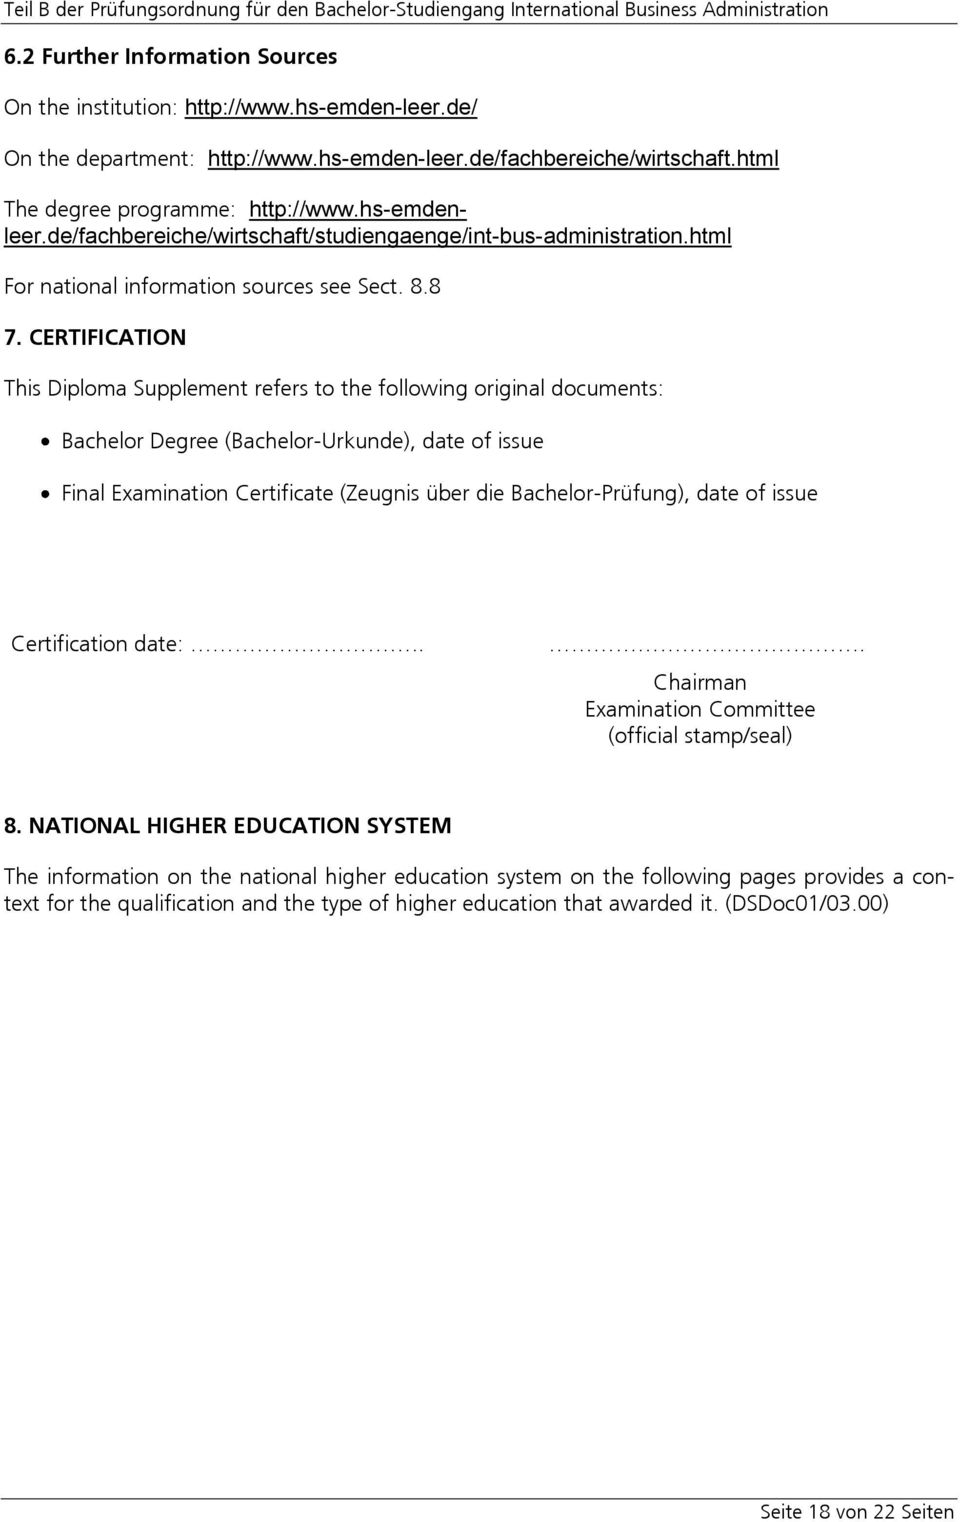 CERTIFICATION This Diploma Supplement refers to the following original documents: Bachelor Degree (Bachelor-Urkunde), date of issue Final Examination Certificate (Zeugnis über die Bachelor-Prüfung),